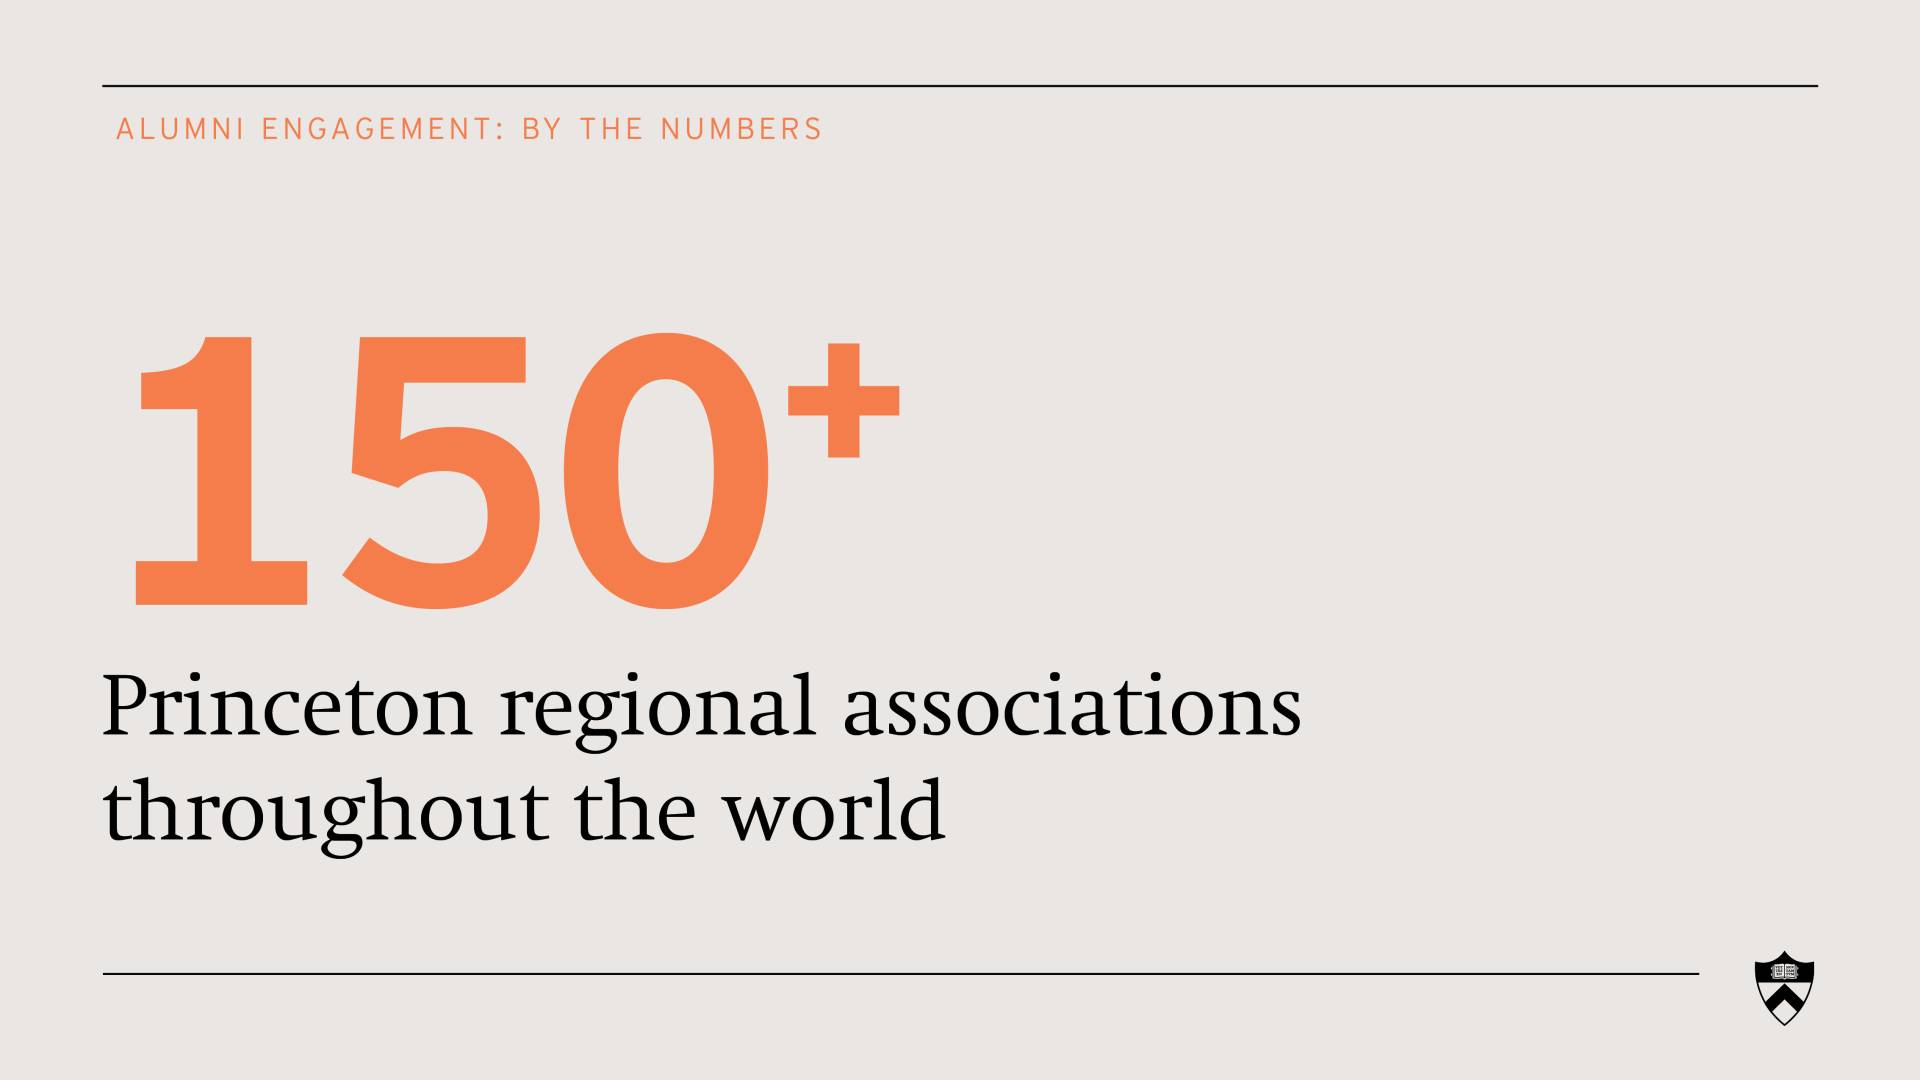 Princeton regional associations throughout the world: 150+